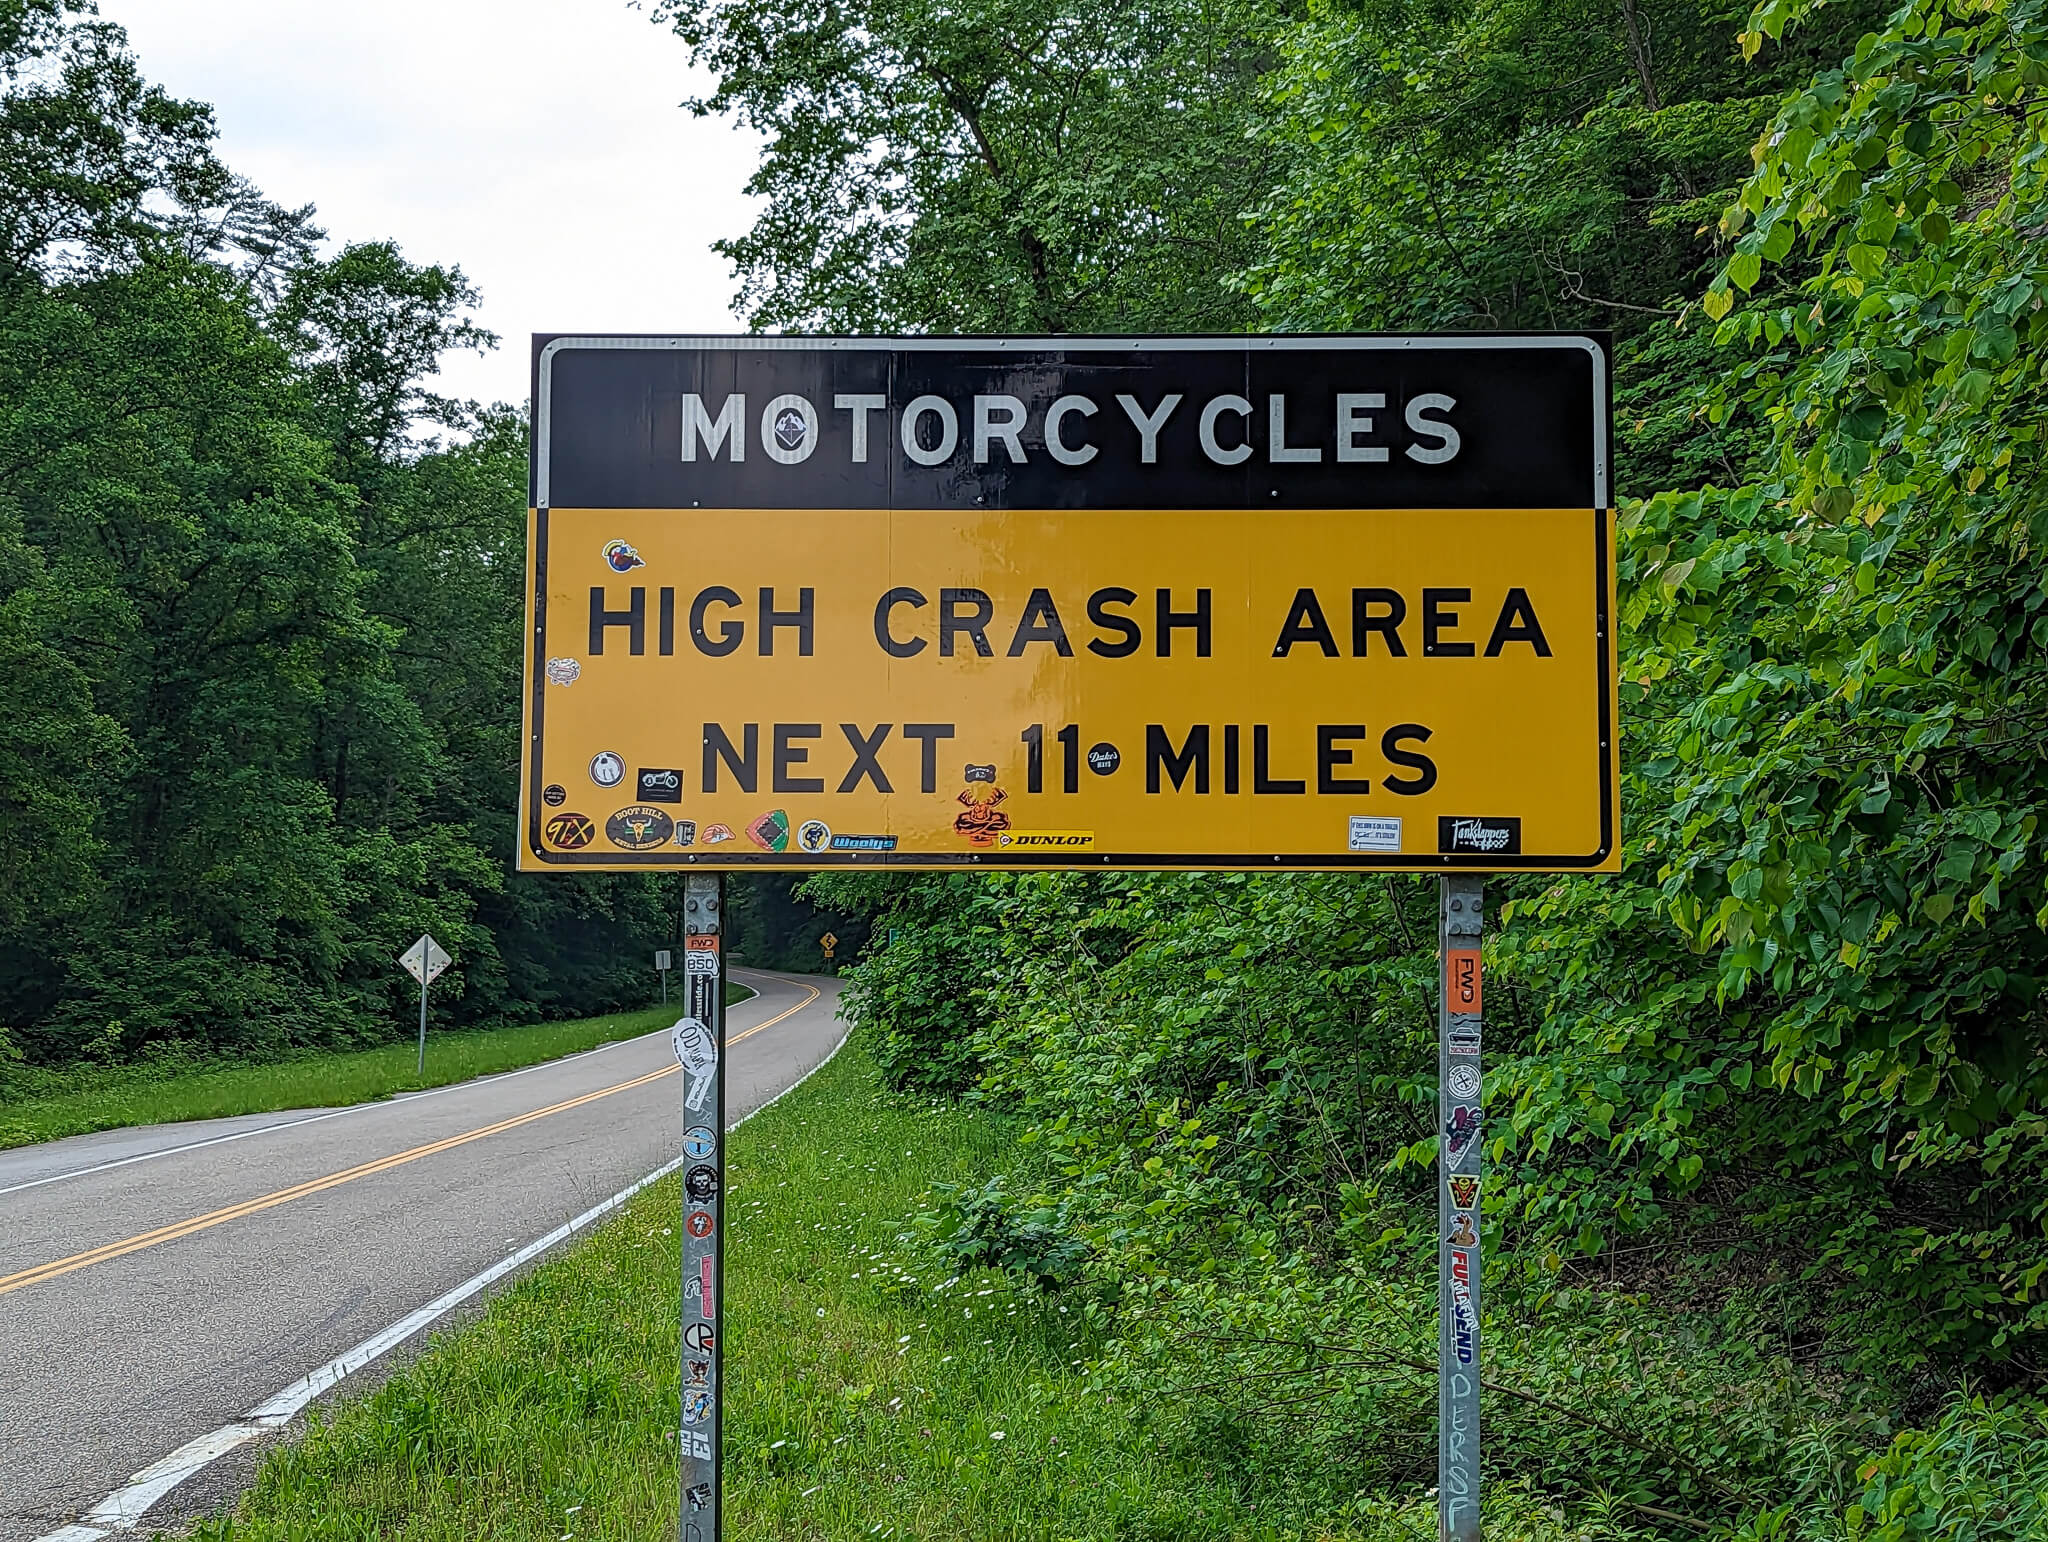 Sign reading “Motorcycles: High Crash Area Next 11 Miles”